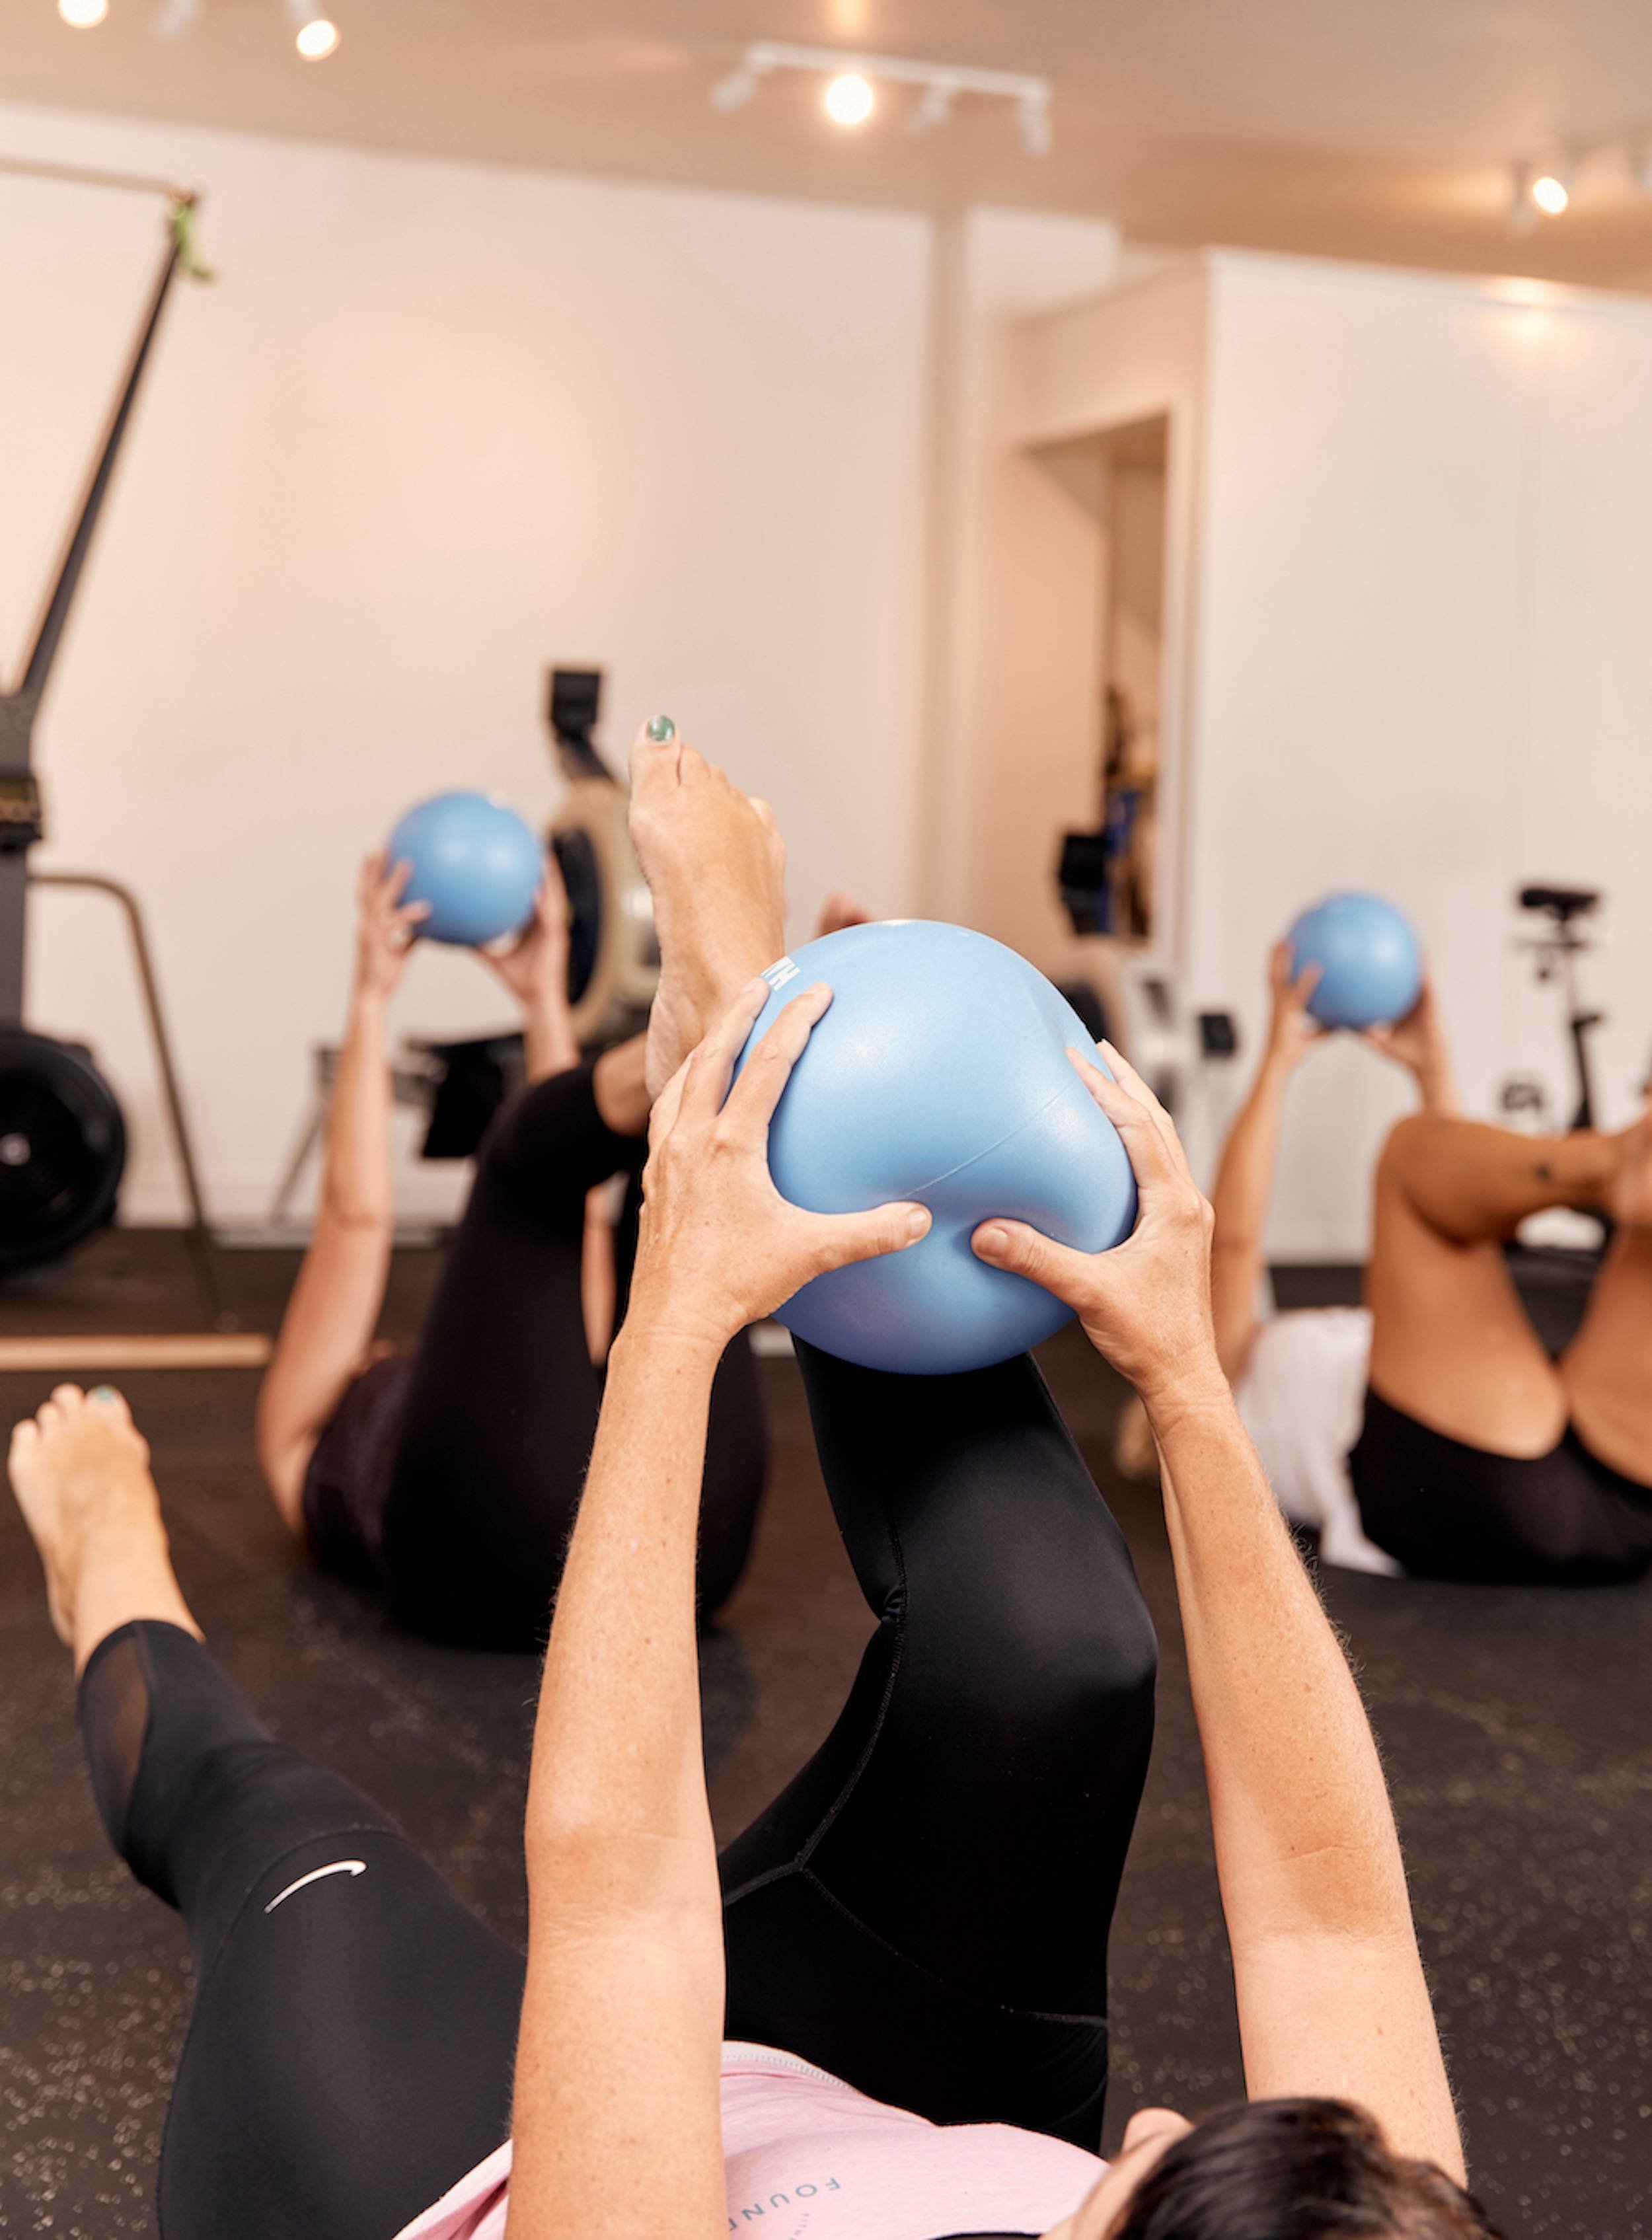 Join our mat pilates classes — Fitness, Wellbeing